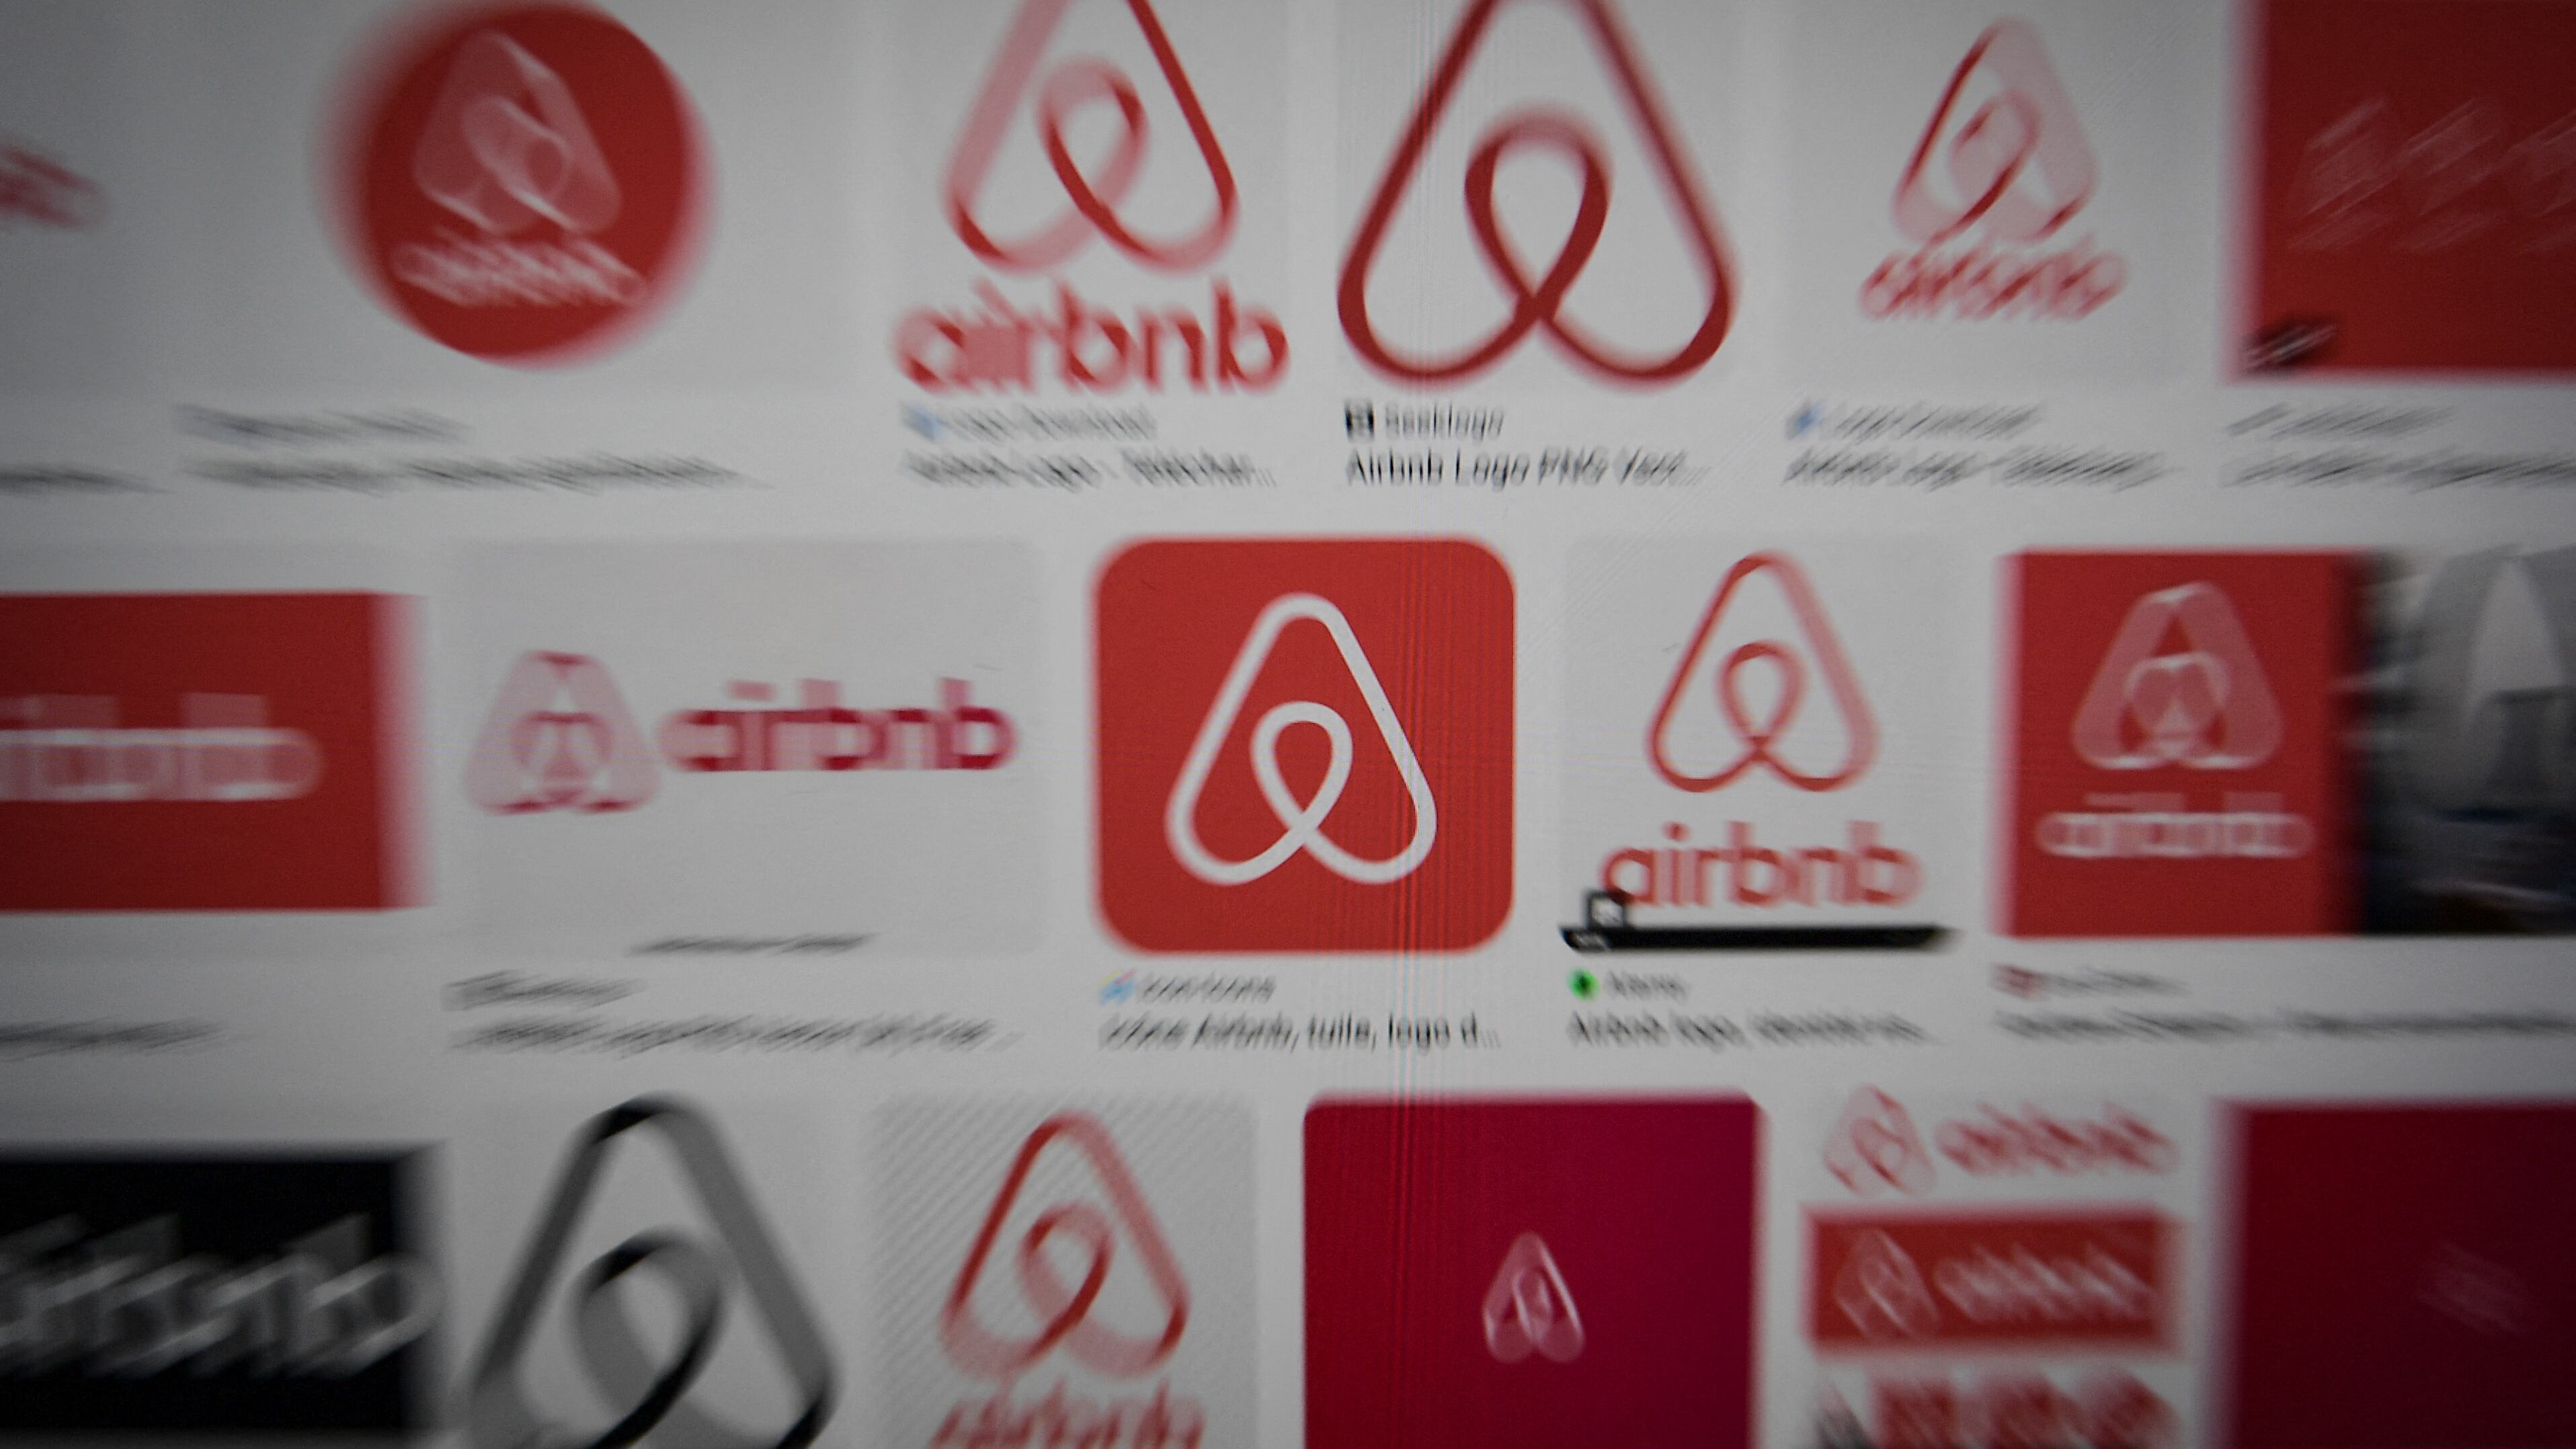 Ed McGuinness has defended renting the Airbnb property